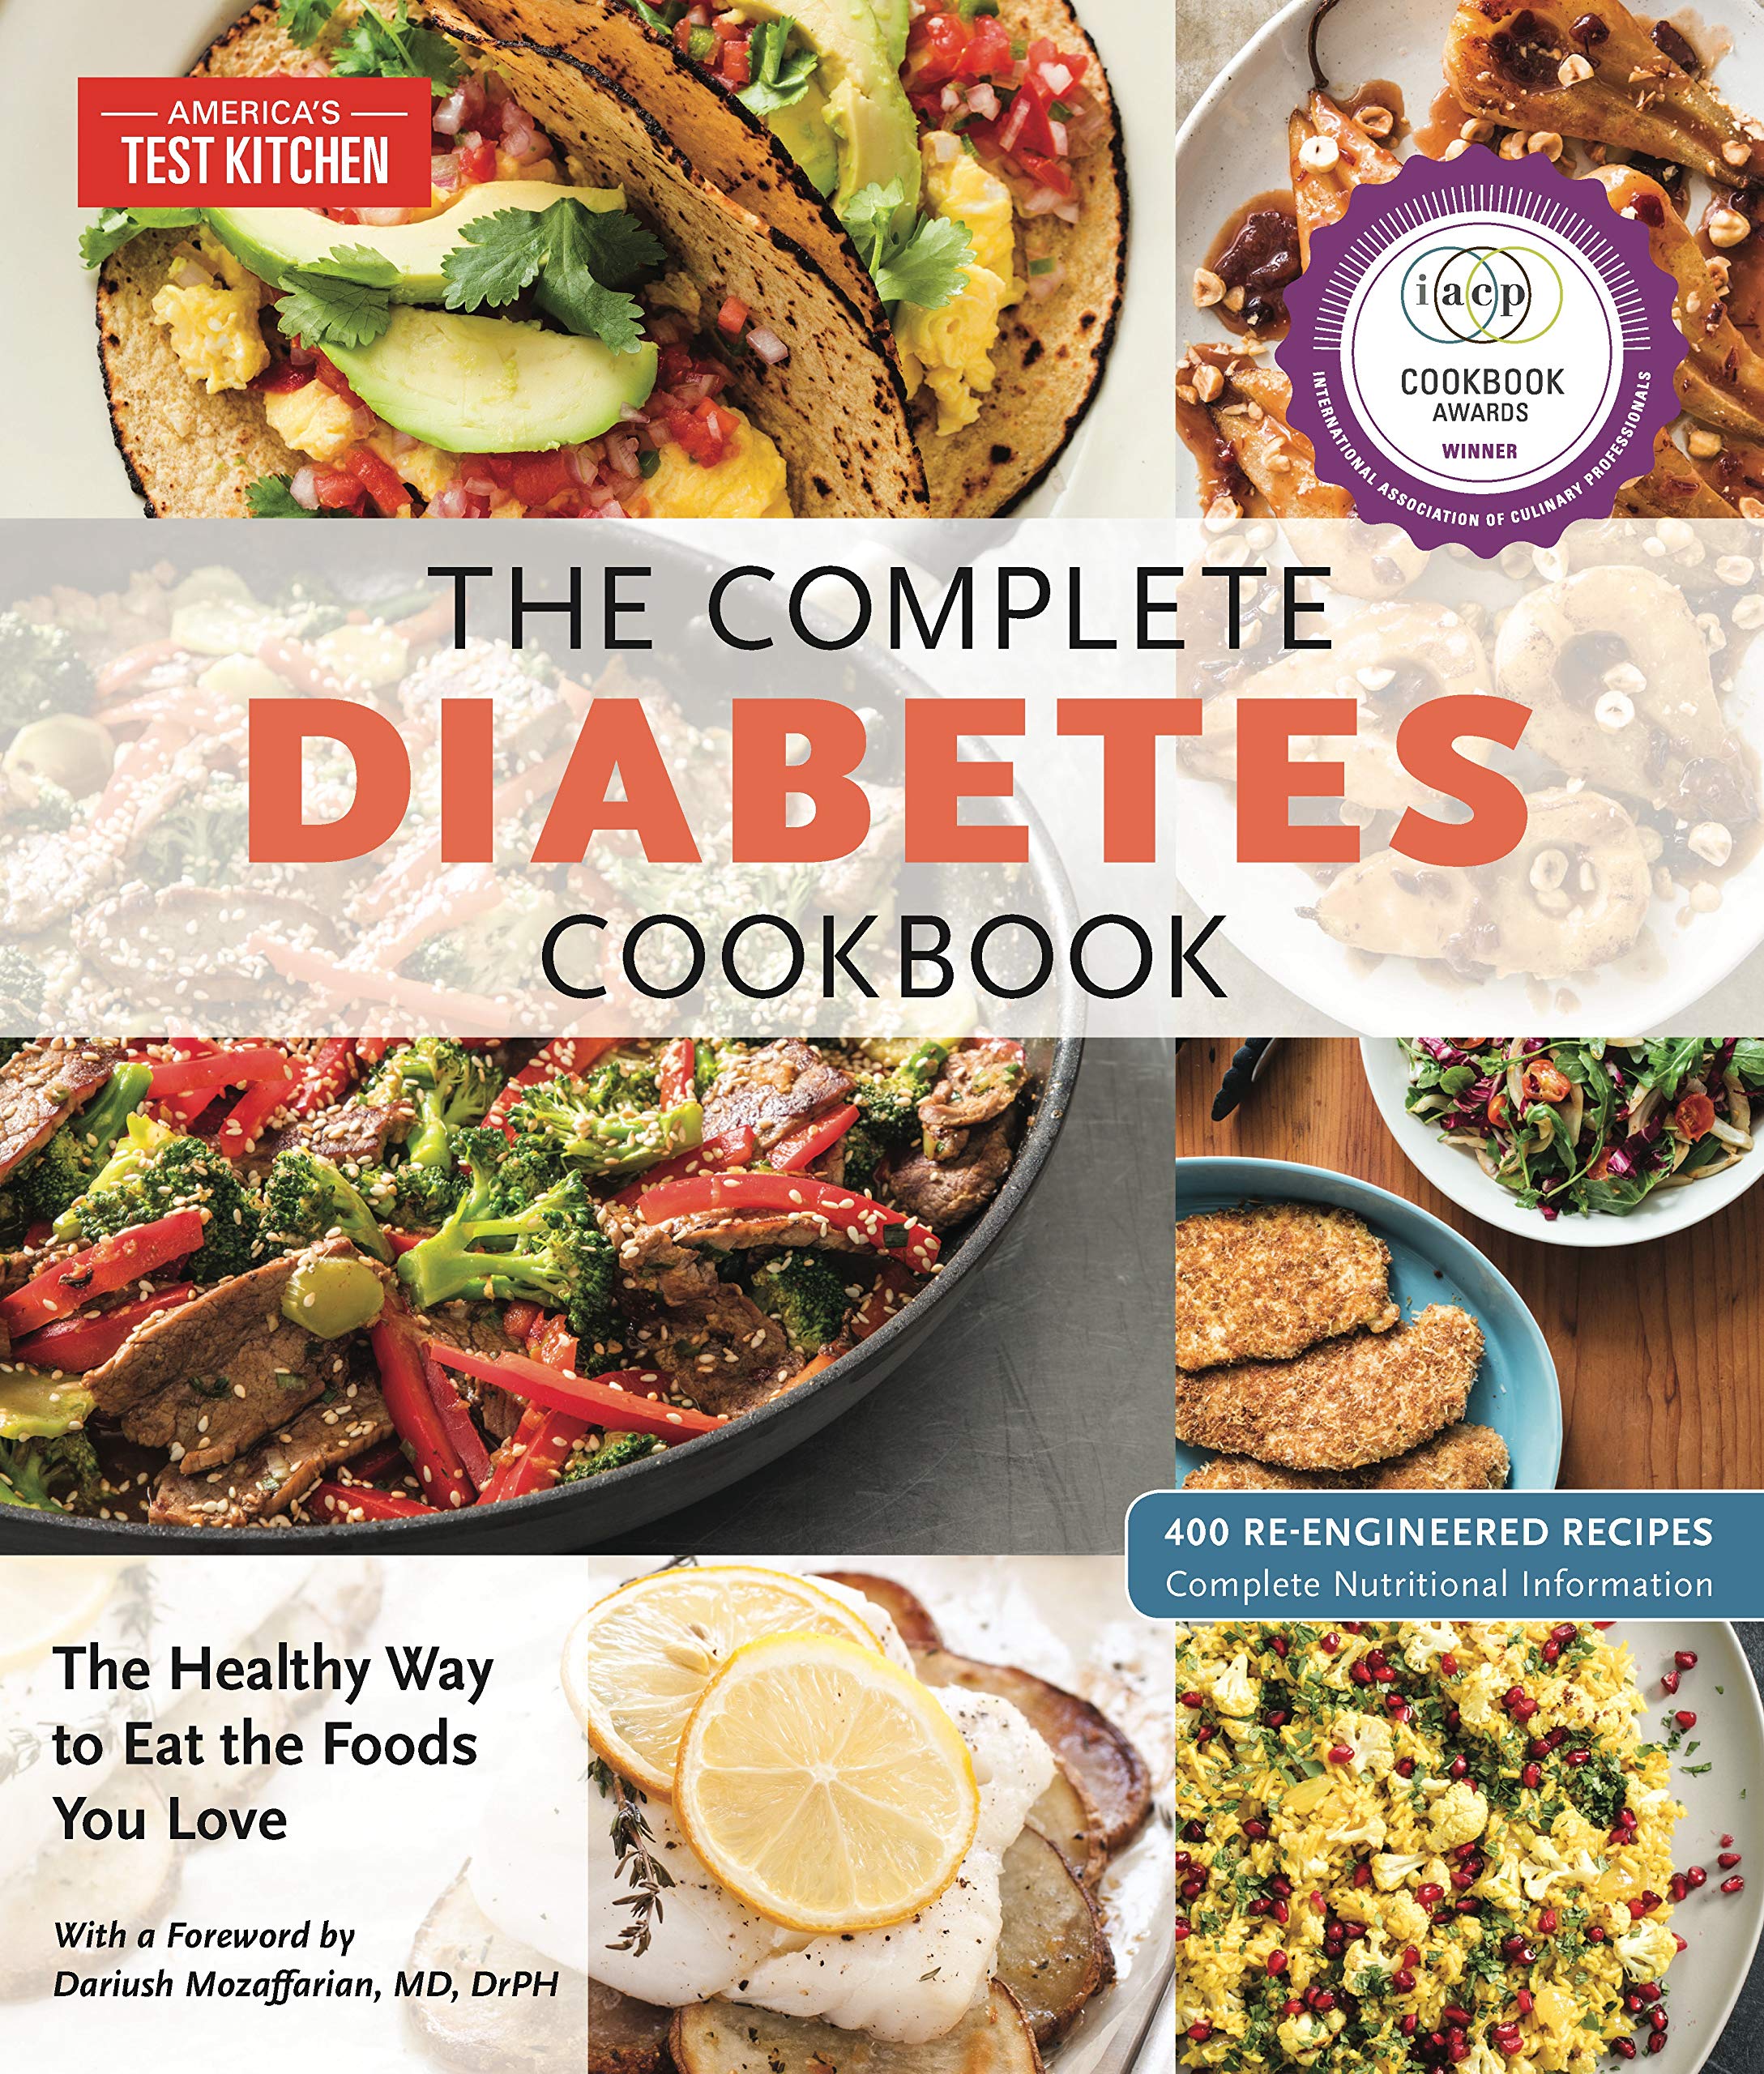 The Complete Diabetes Cookbook (America's Test Kitchen)